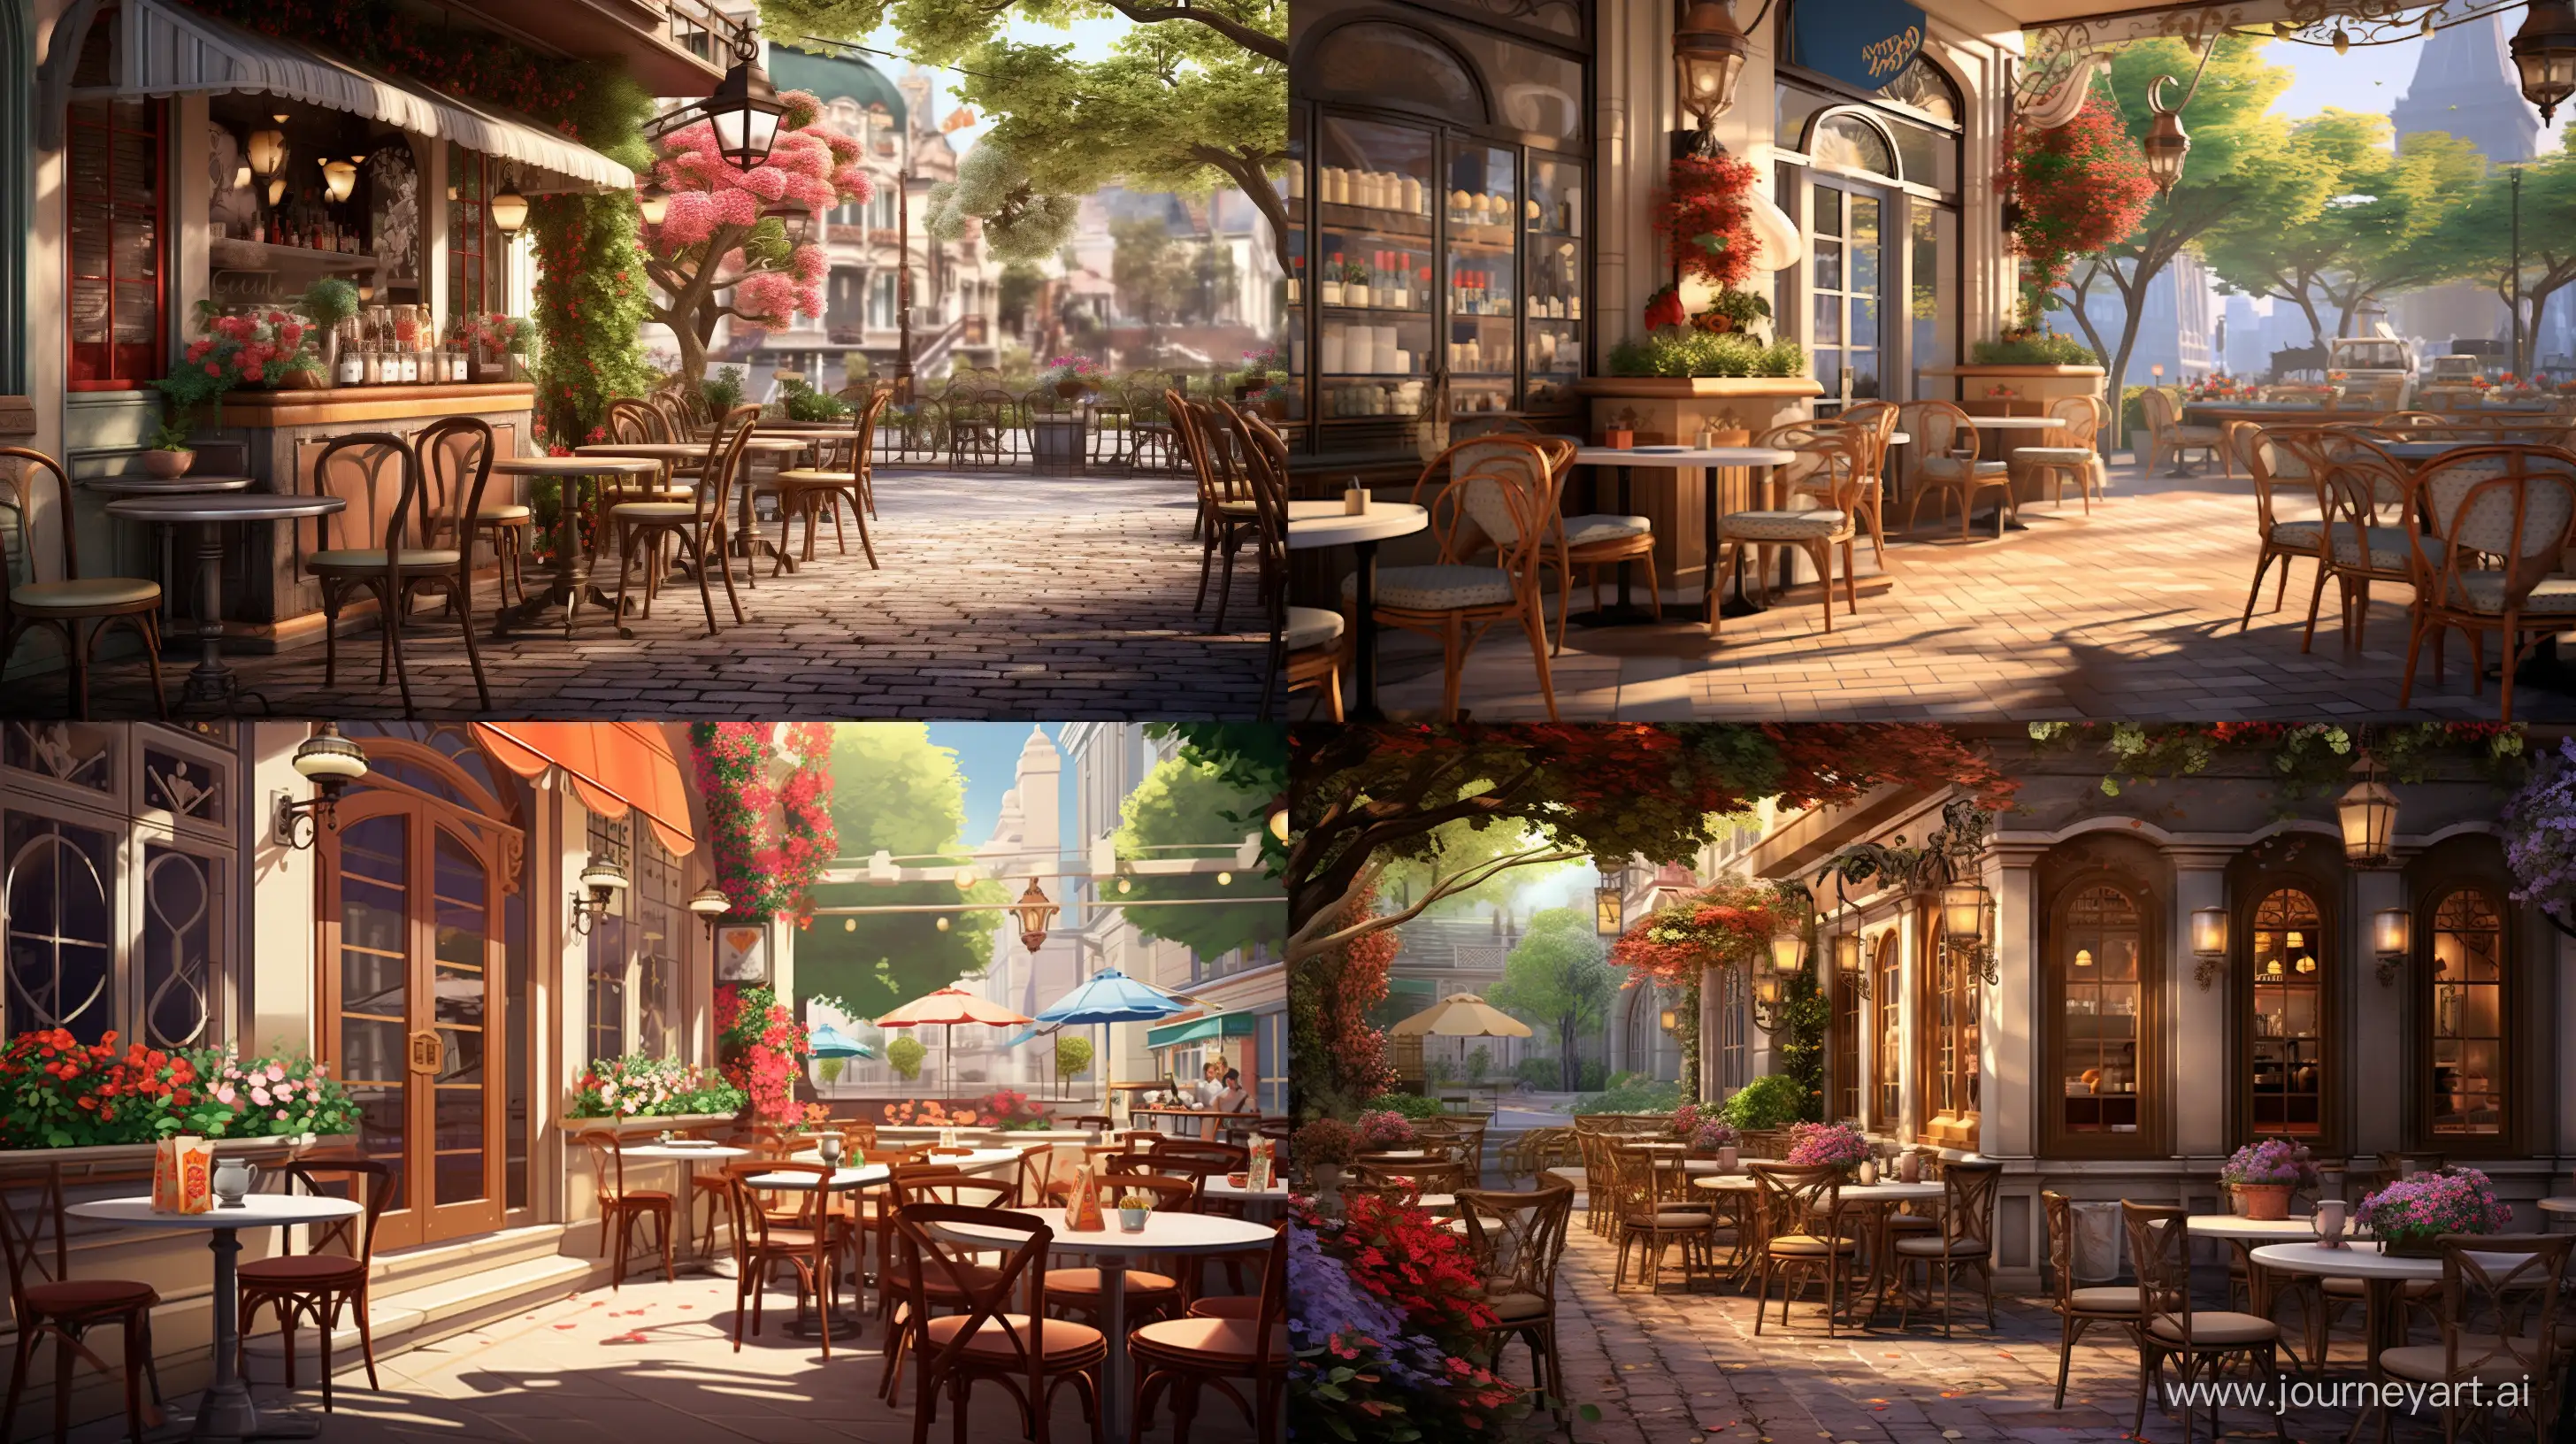 Quaint-European-Cafe-with-Scrumptious-Pastries-and-Cozy-Ambiance